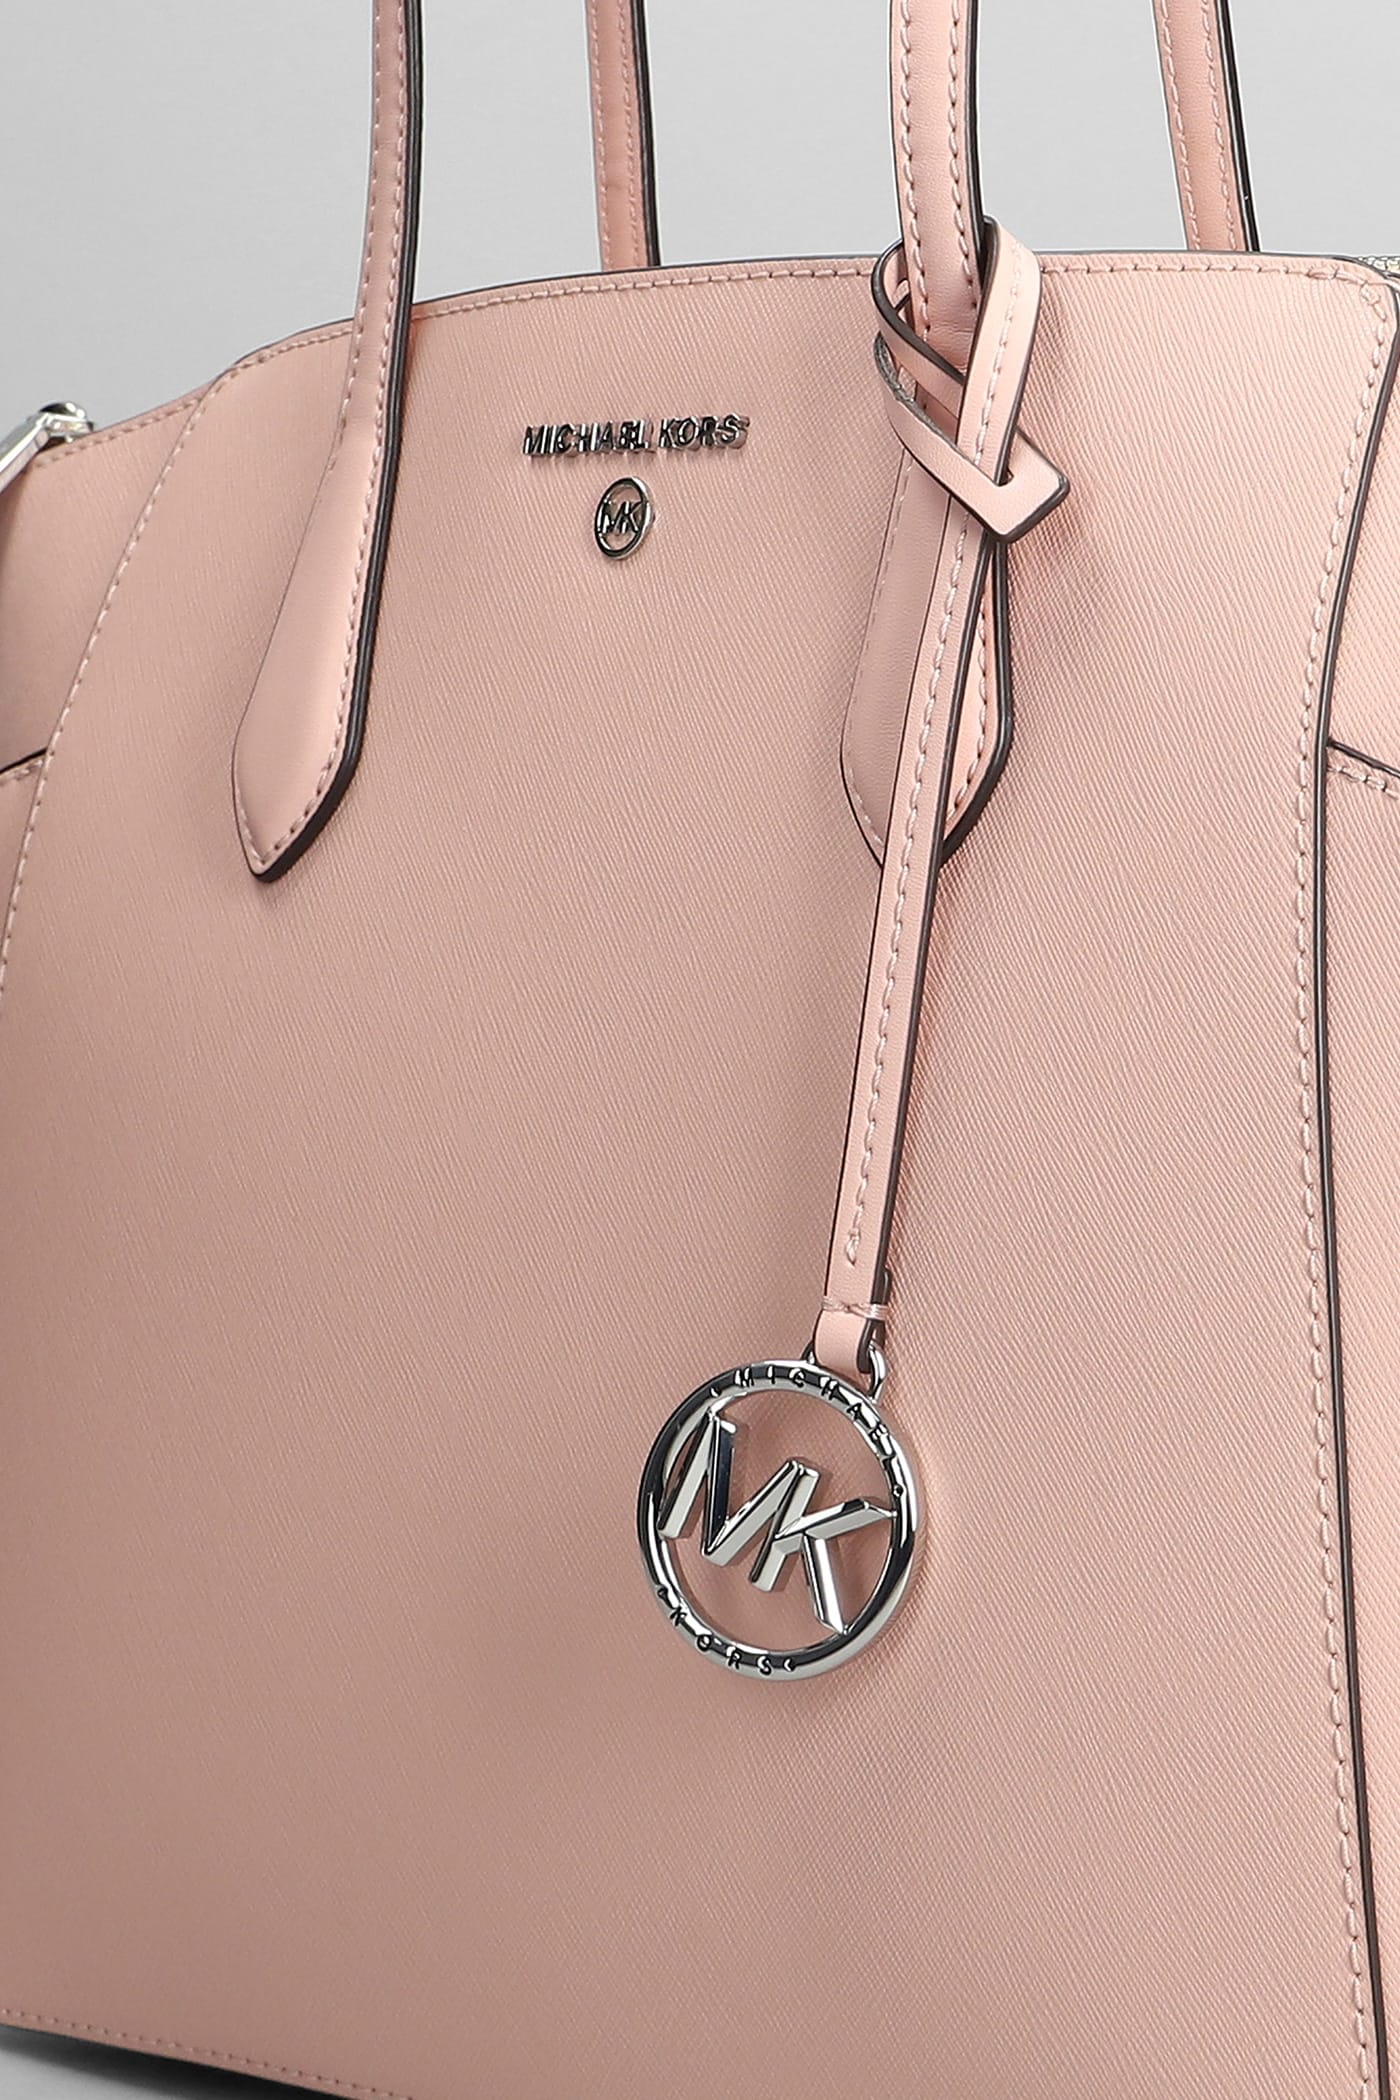 Michael Kors - Women's Marilyn Shopping Bag Tote - Pink - Leather